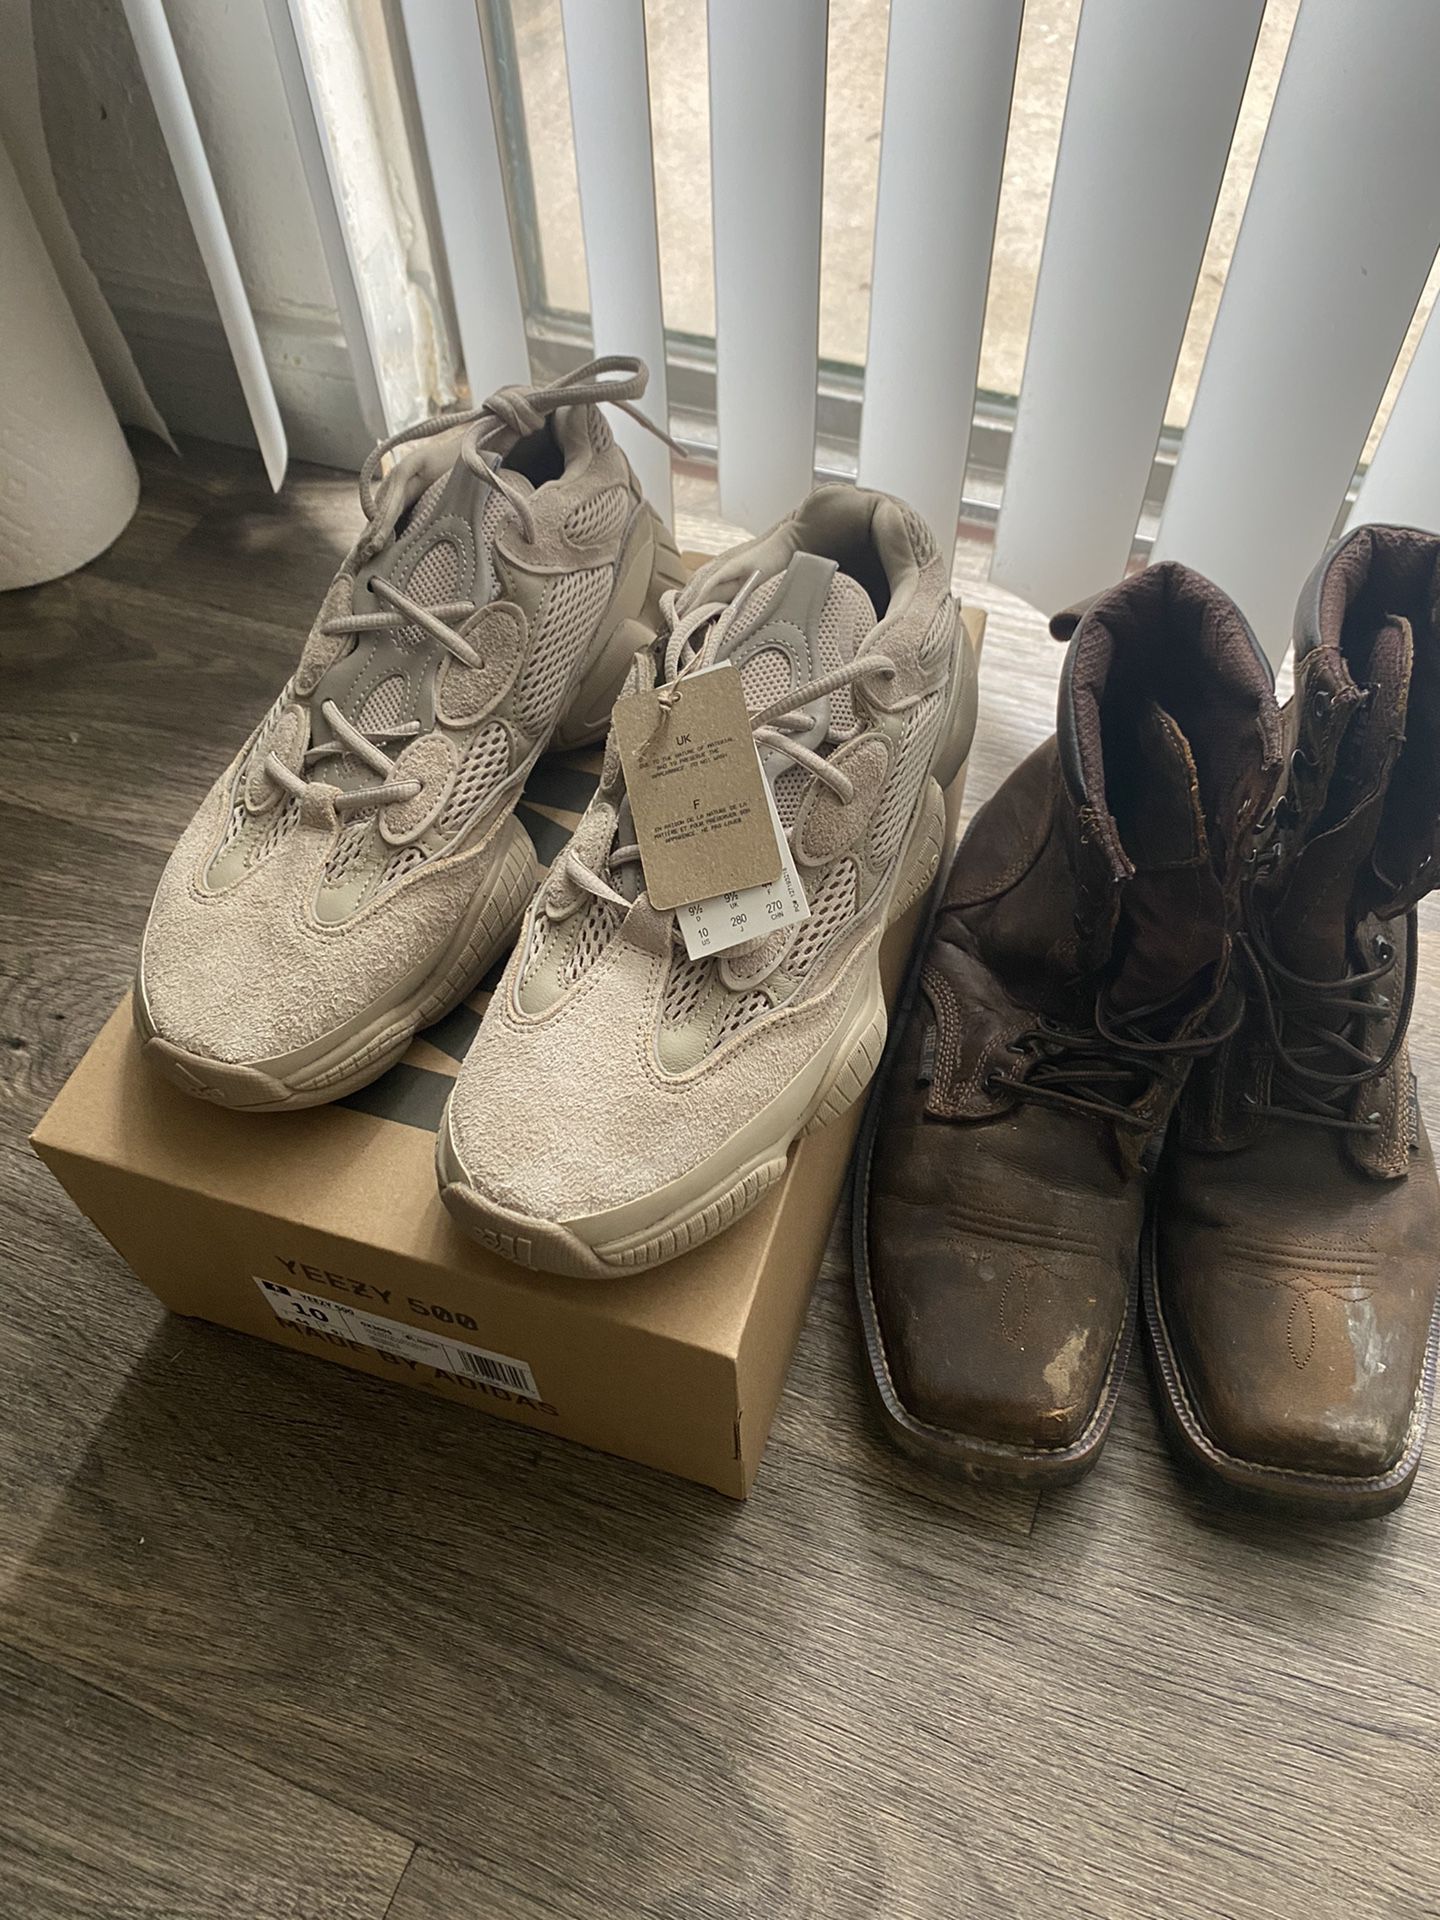 Rund defile gravid Steel Toe Boots And Yeezy 500 For Sale Both Size 10 for Sale in Houston, TX  - OfferUp